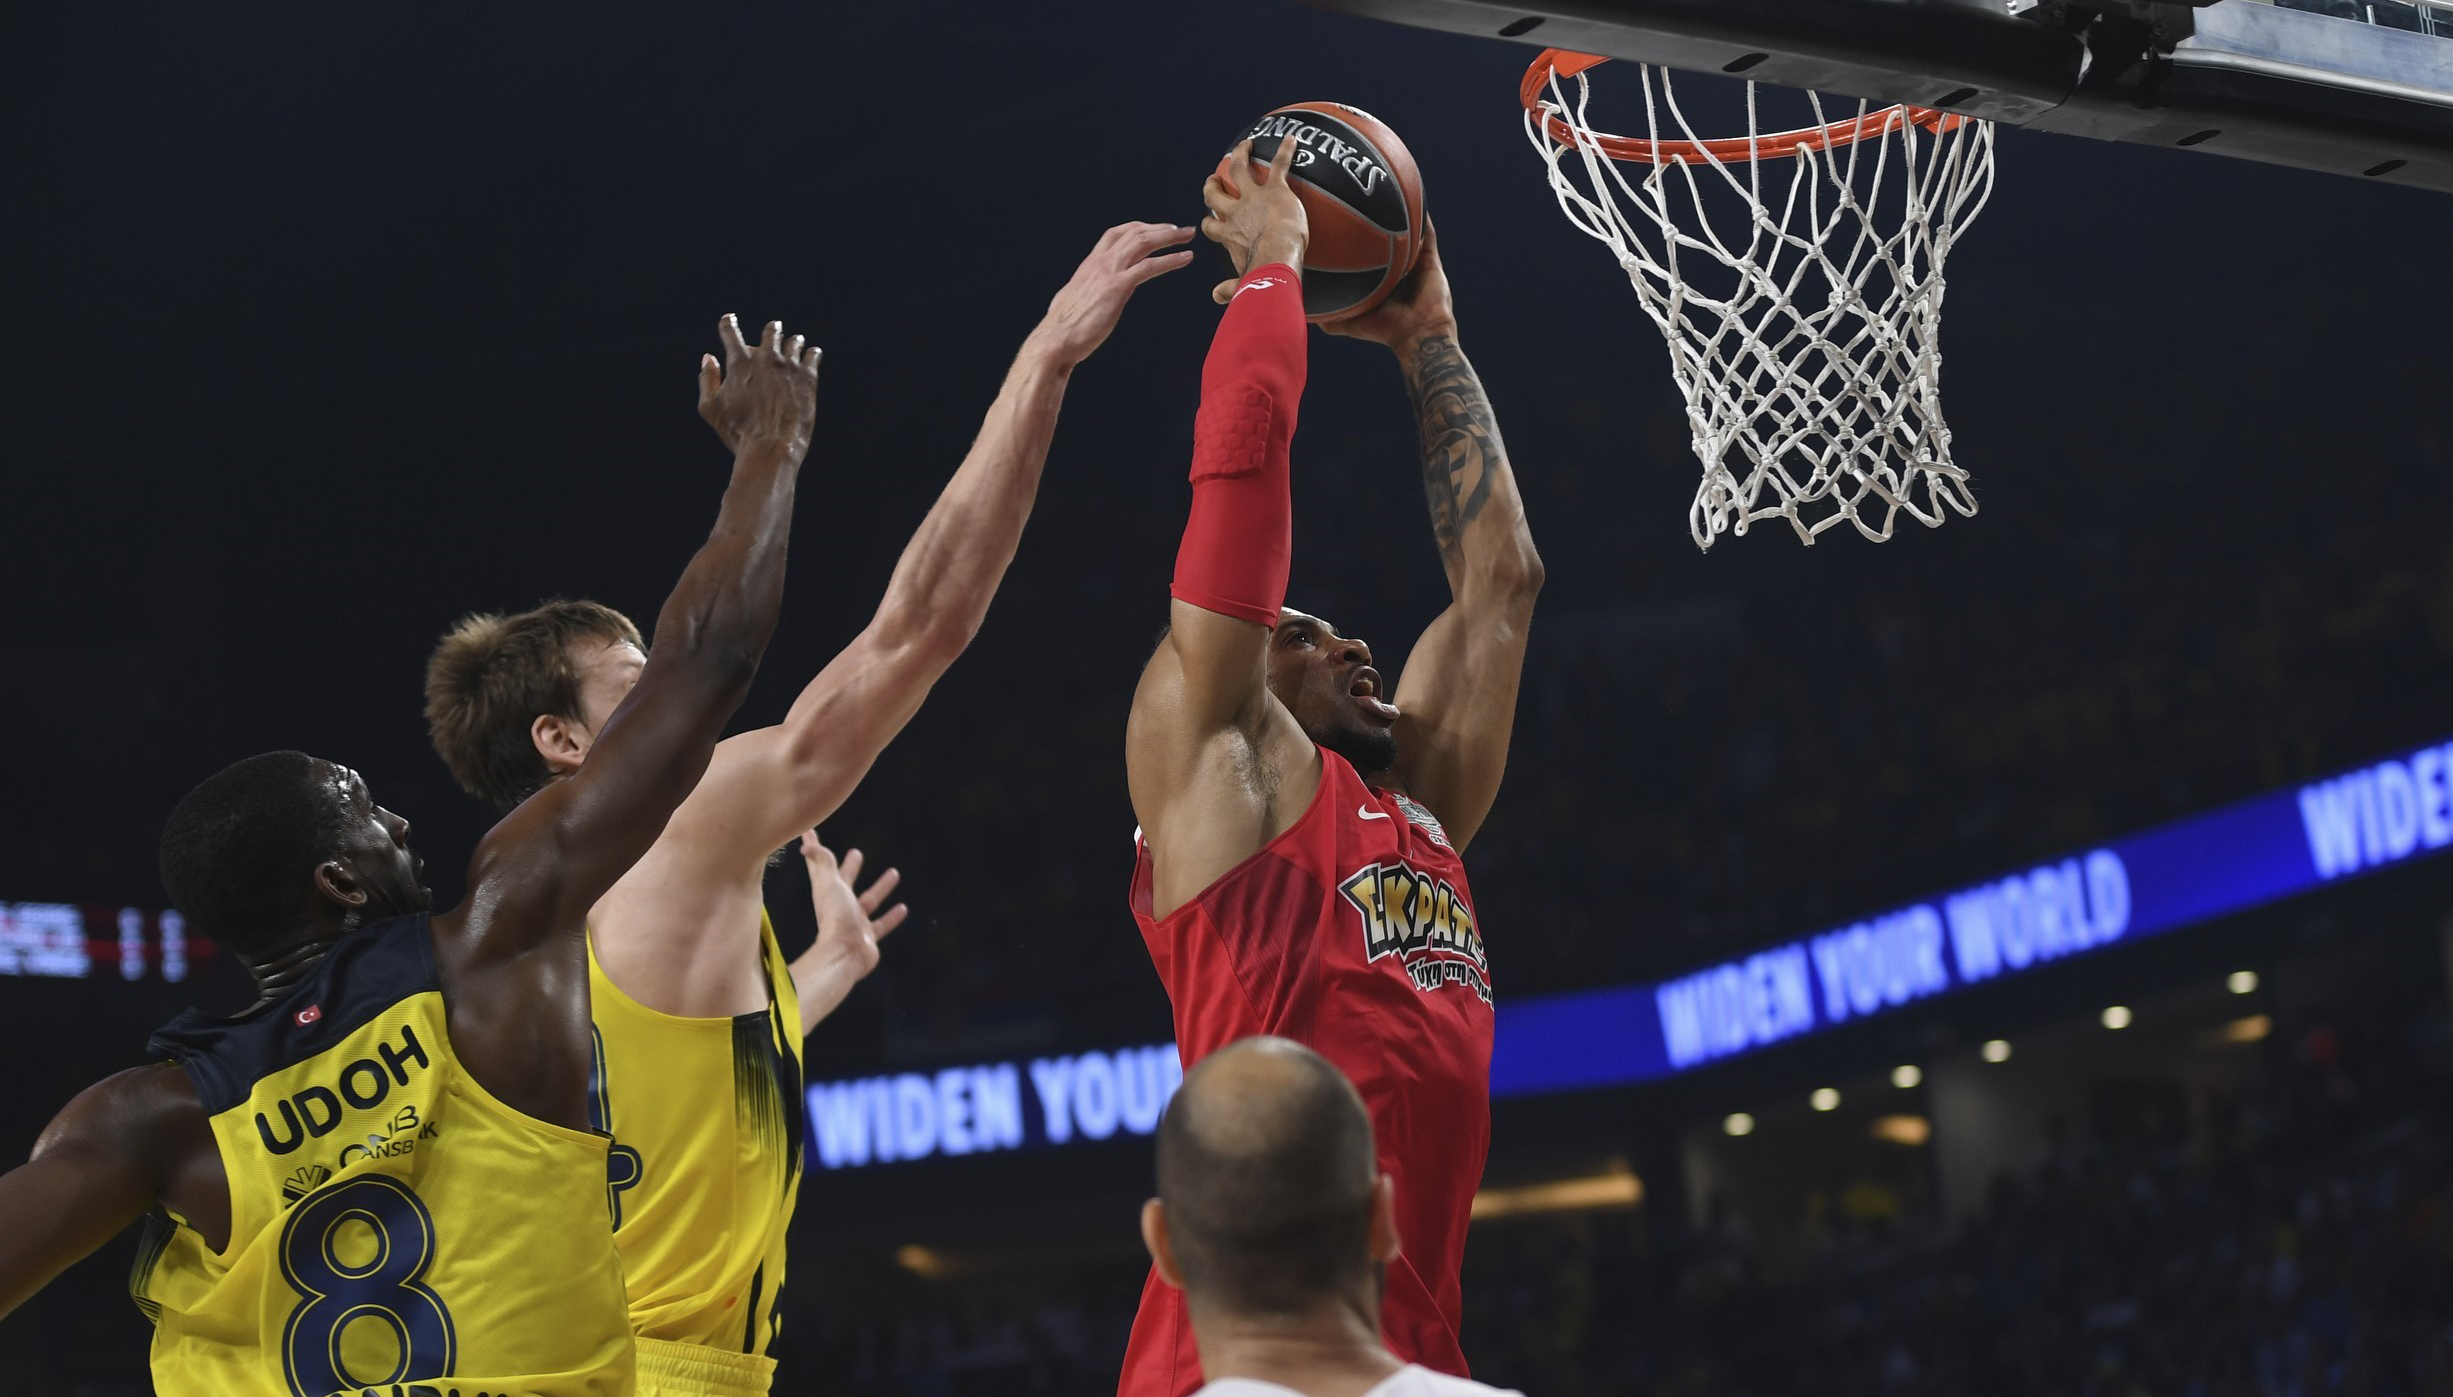 Eurolega Basket / Eurolega basket 2014 Olimpia Milano-Barcellona: orario ... : The final four is finally here, and mvp vasilije micic will attempt to move efes one step closer to a championship.